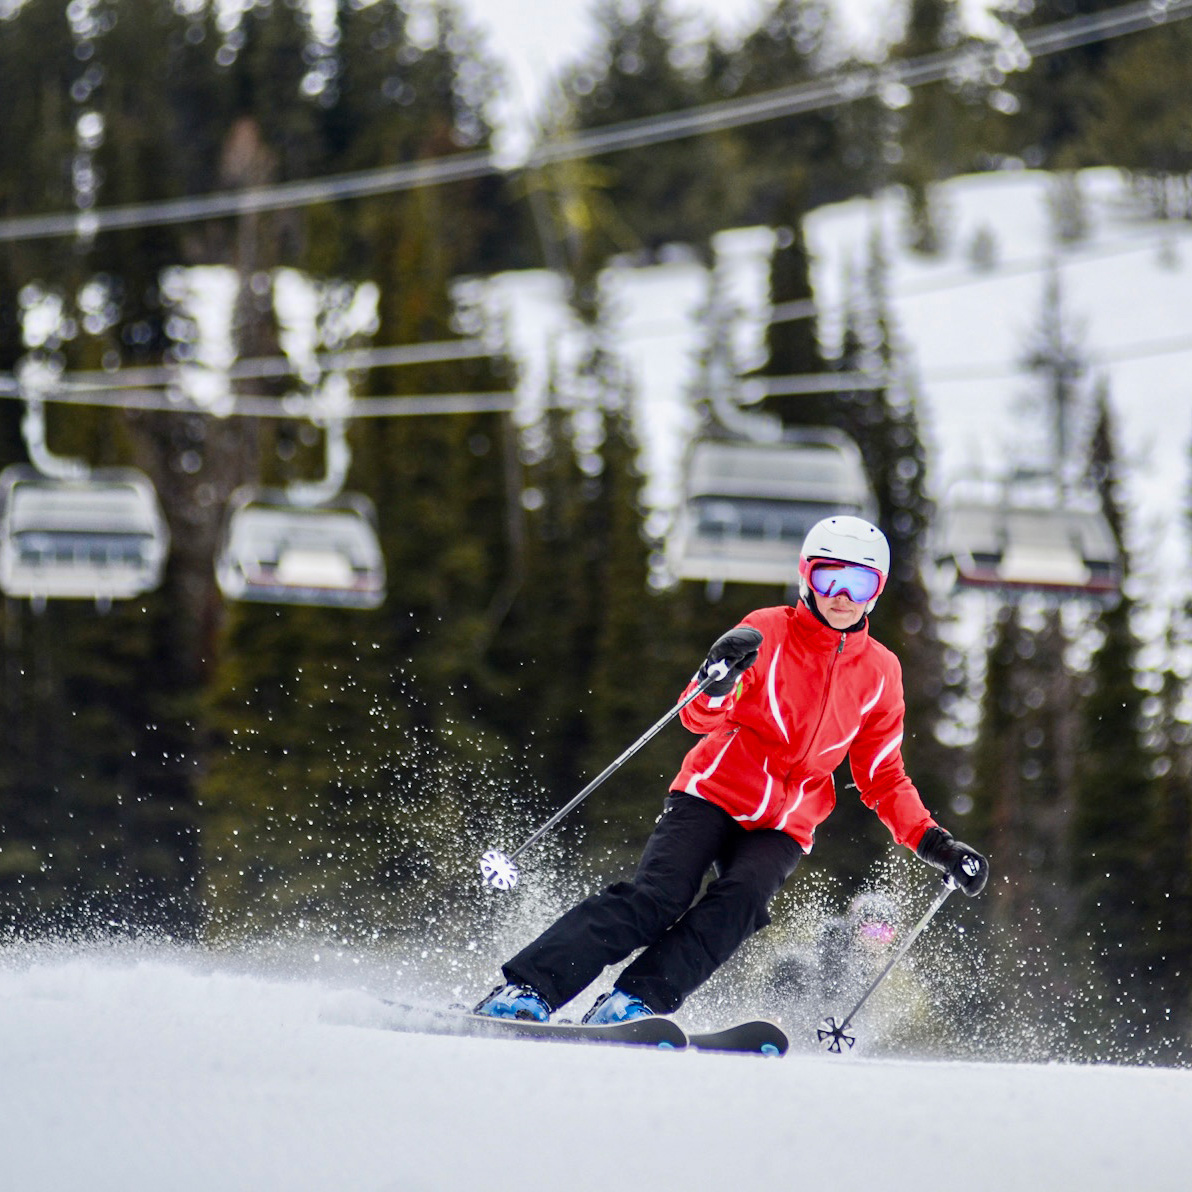 lady in a red jacket skiing on the groomers, Tumwater.